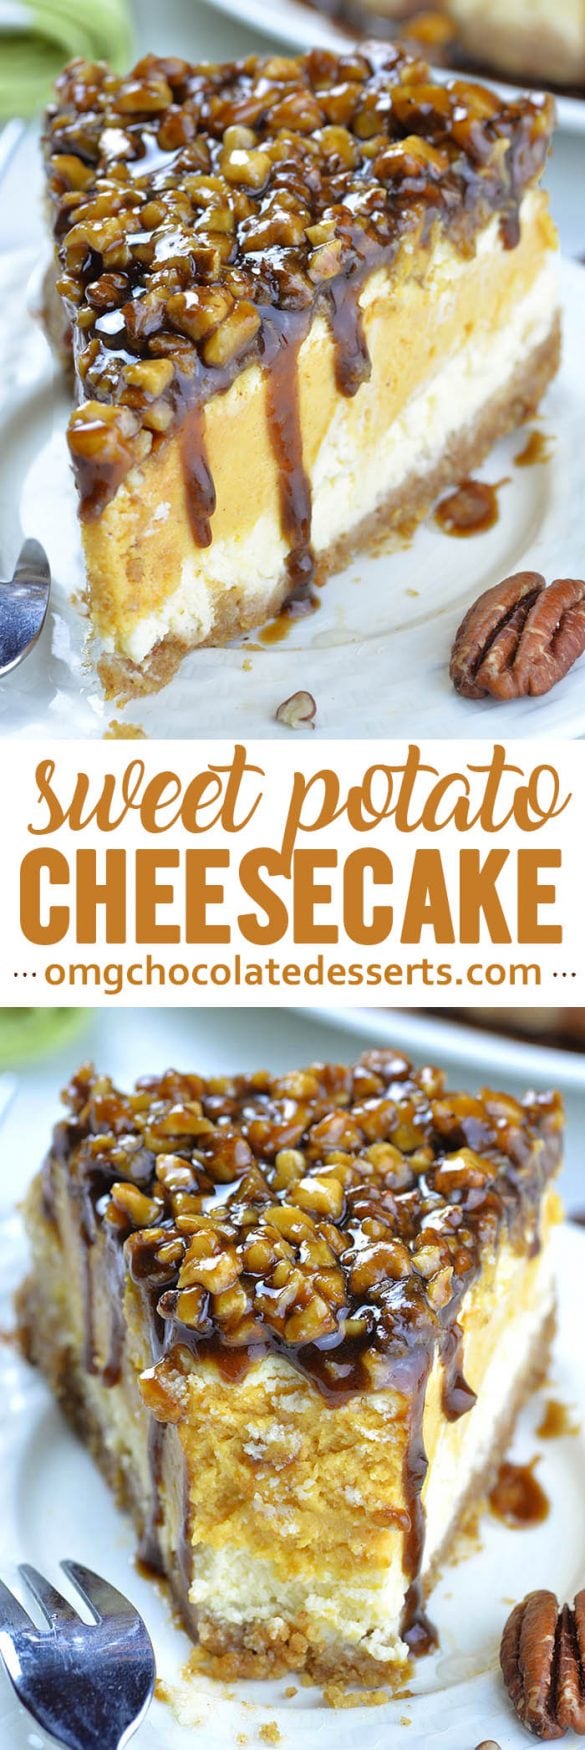 Sweet Potato Cheesecake with Pecan Topping - OMG Chocolate Desserts